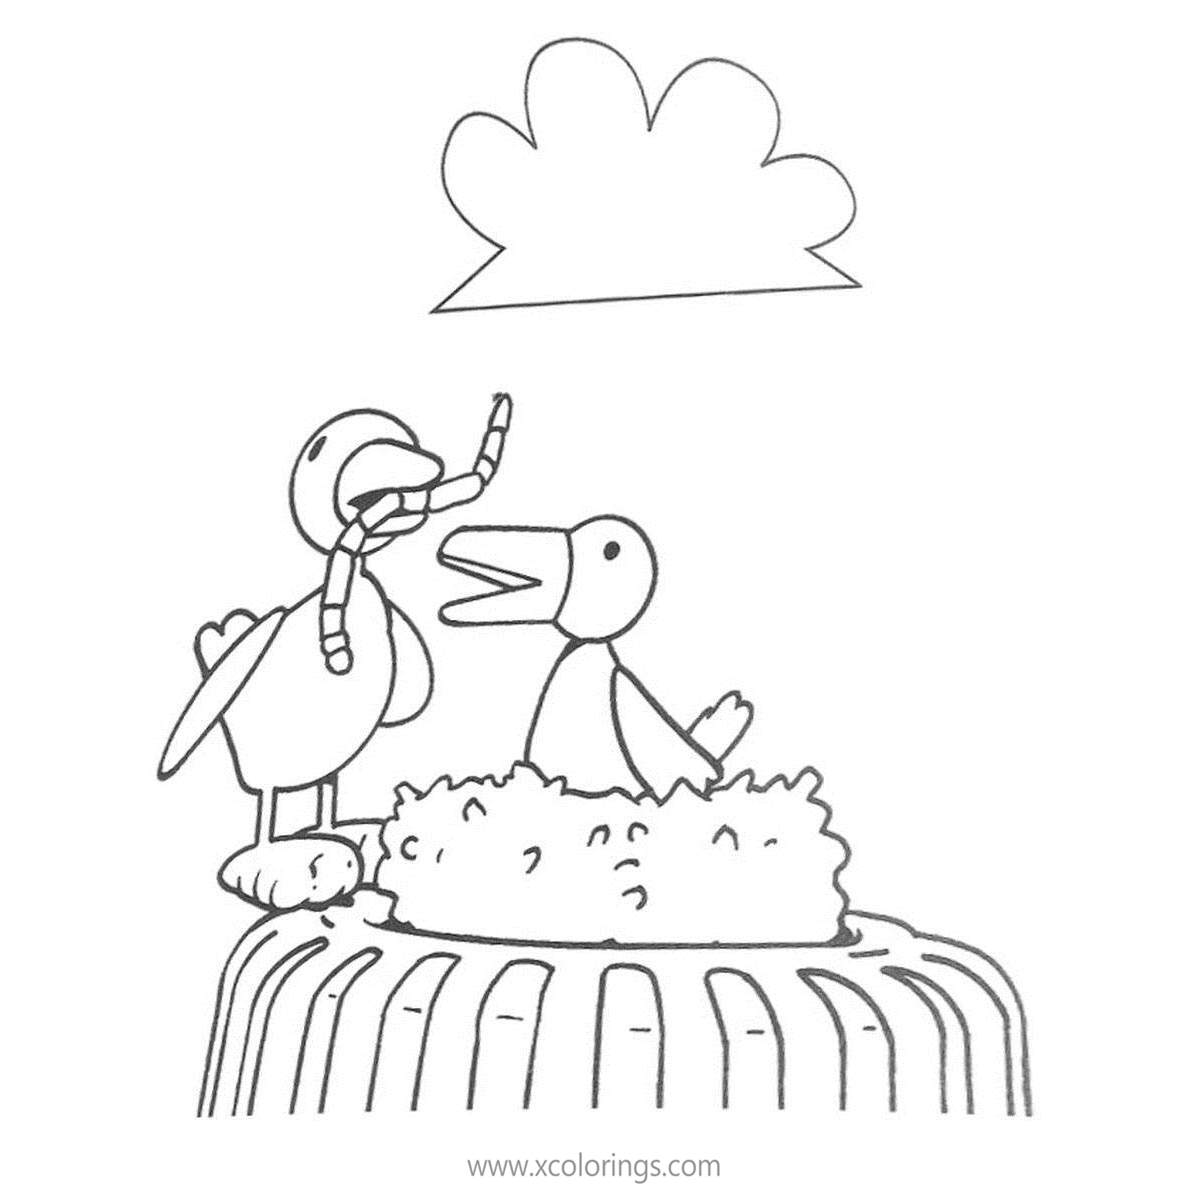 Free Bob the Builder Coloring Pages Bird is Feeding Her Baby printable